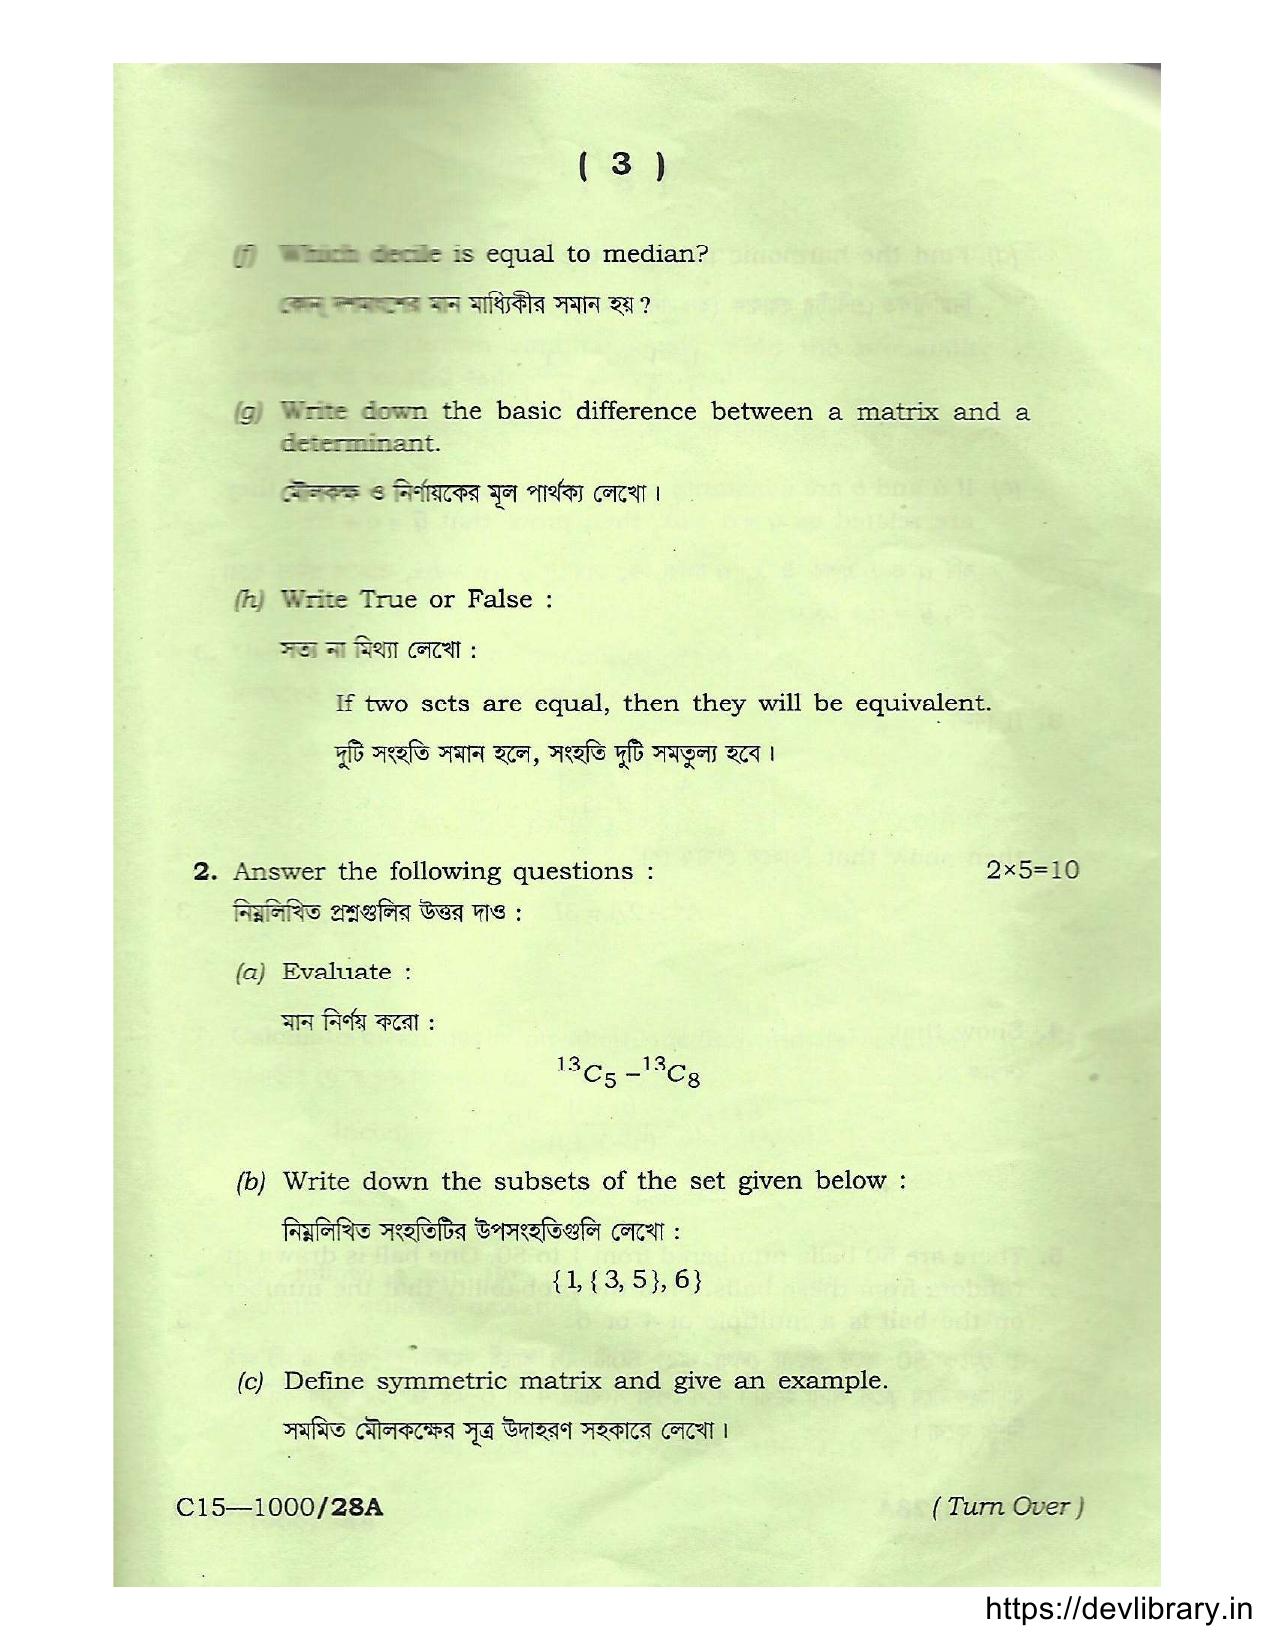 Assam HS 2nd Year Commercial Mathematics and Statistics 2015 Question Paper - Page 3